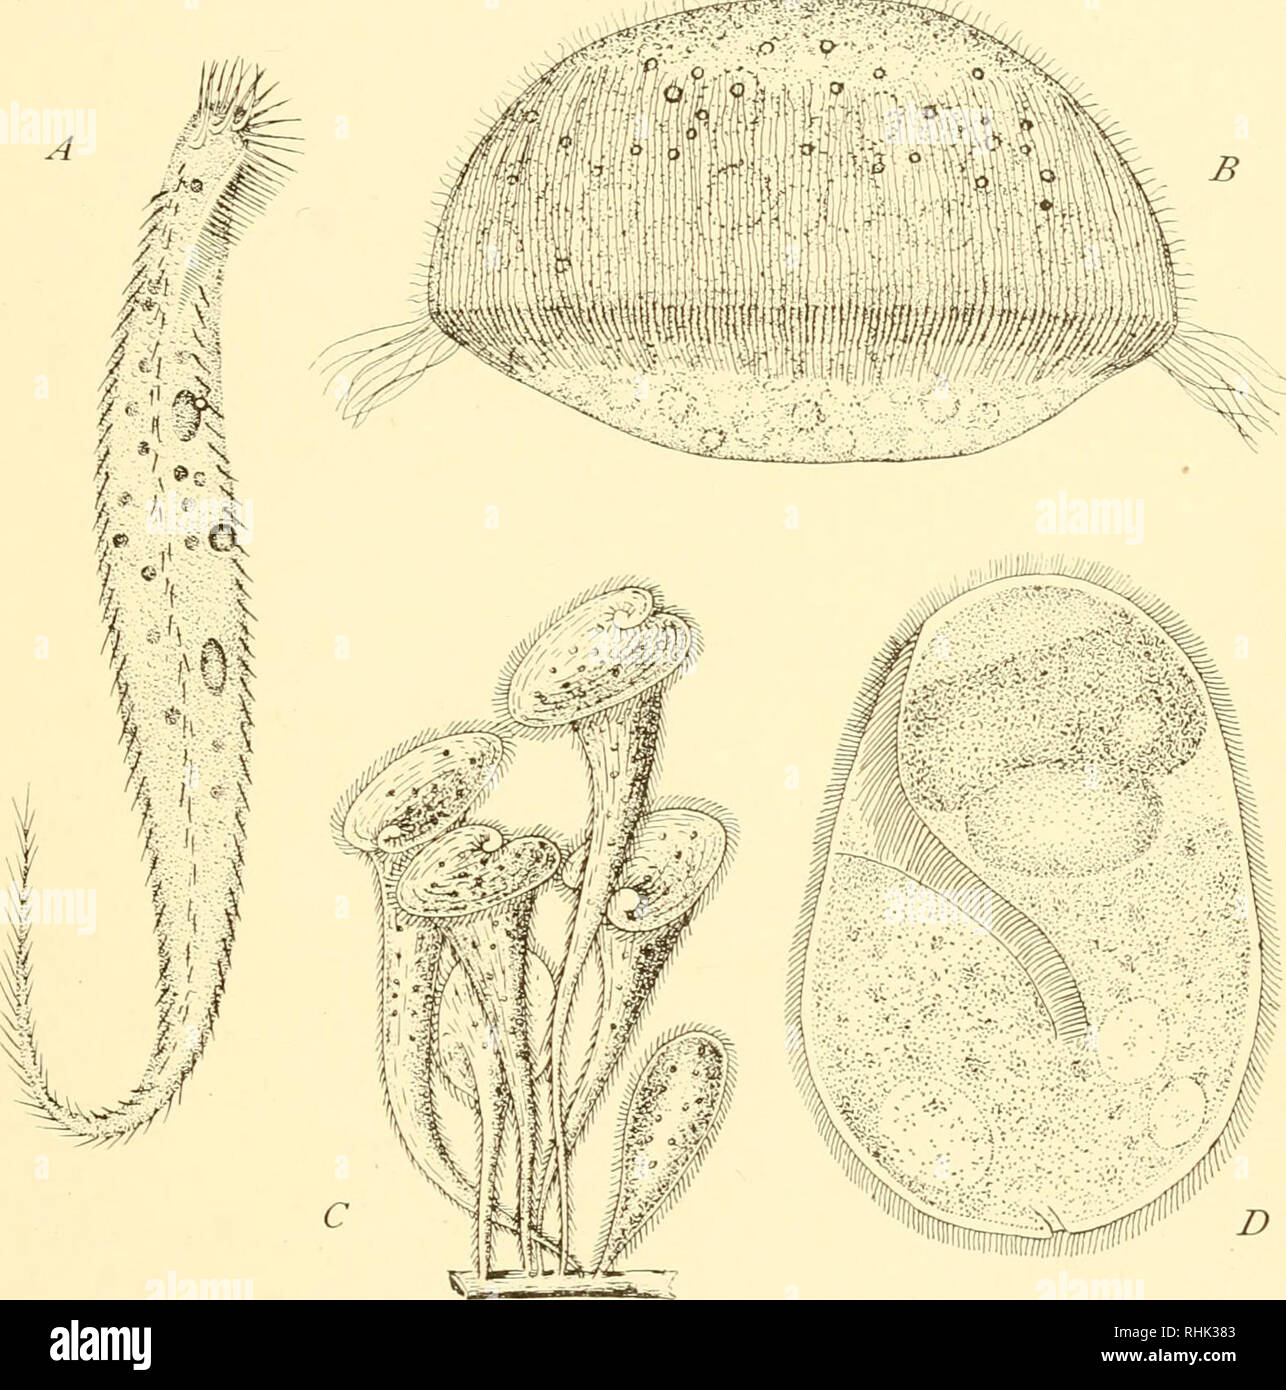 . The biology of the protozoa. Protozoa; Protozoa. DERIVED ORGANIZATION—TAXONOMIC STRUCTURES 151 formations comparable with the rotation of protoplasm in Nitella or circulation in Tradescantia. Axopodia of the motile Heliozoa, axial filaments of the inactive species and stereoplasmic cor.s of the rhizopodia may be regarded as successive phases in the modi- fication of vibratile flagella. These types of pseudopodia have in. Fig. 81.—Types of Ciliata. A, Uroleptus pisces (after Stein); B, Cyclotrichium gigas (after Faure-Fremiet); C, Stentor polymorpha (after Biitschli); D, Nyctotherus ovalis (o Stock Photo